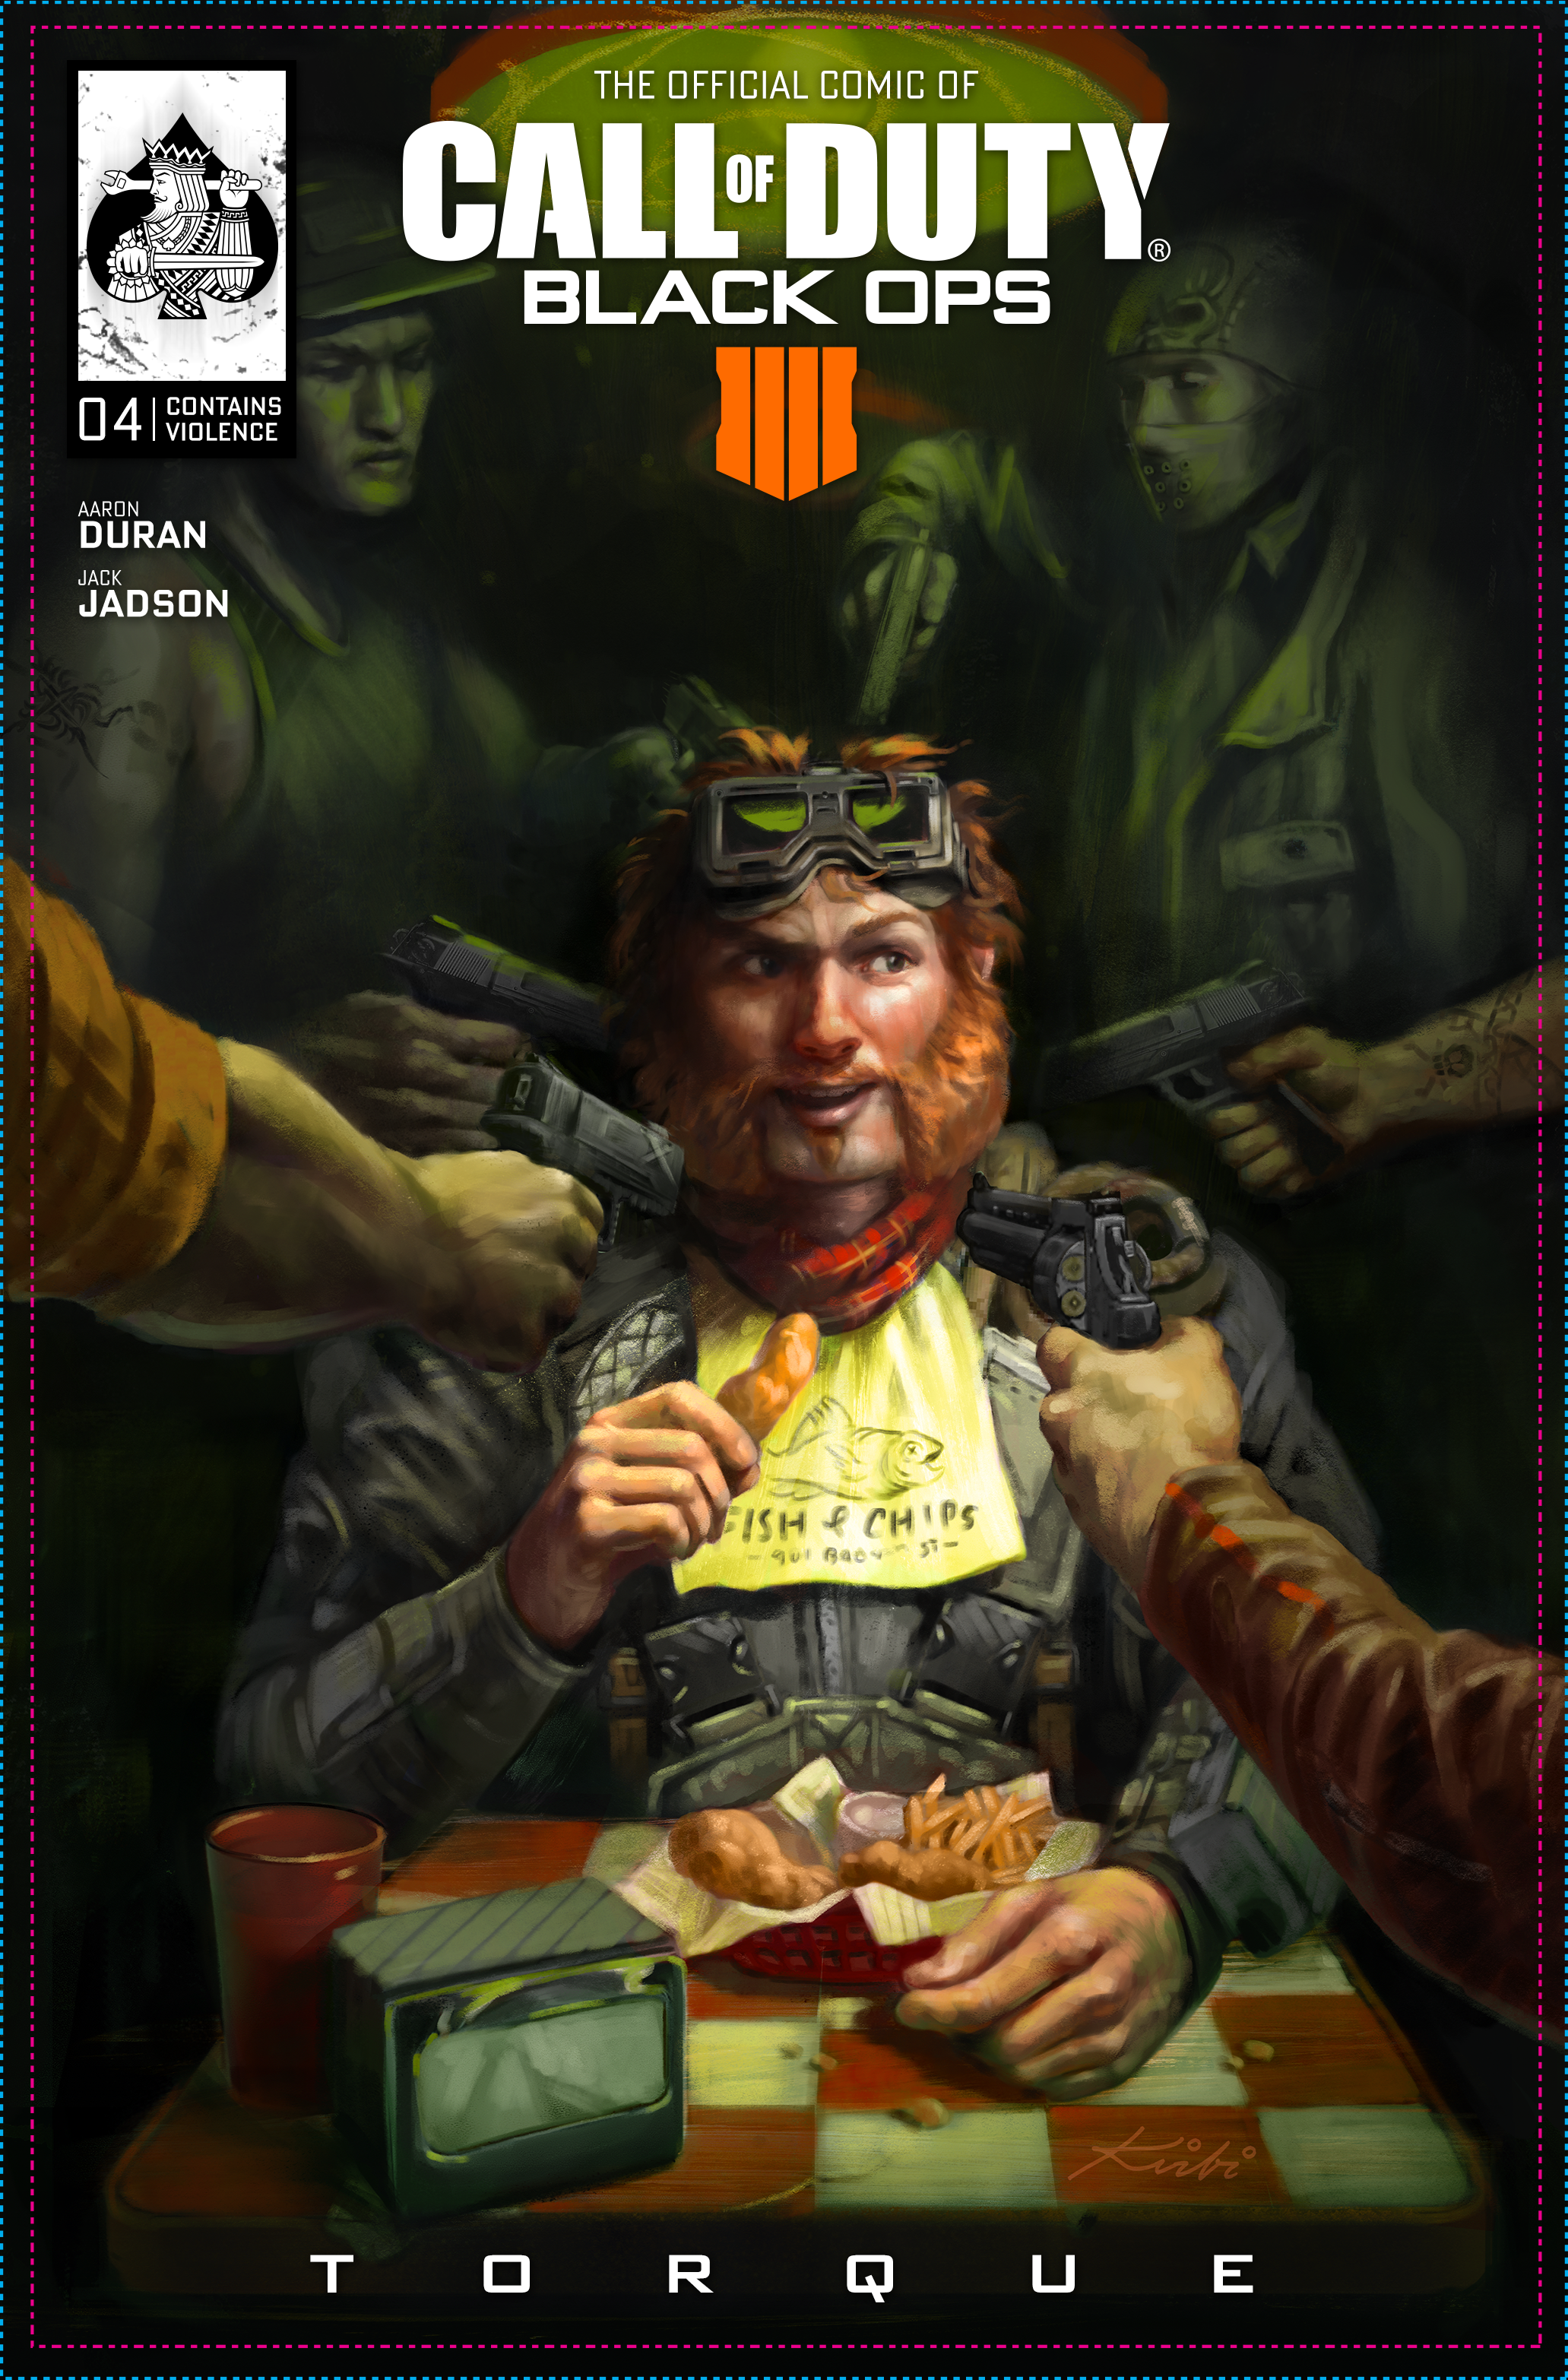 New call of duty black ops 4 Artwork for 2018 / 2019 See COD 4 Videos Here /playlist?list=PL. Call of duty black, Black ops, Call of duty